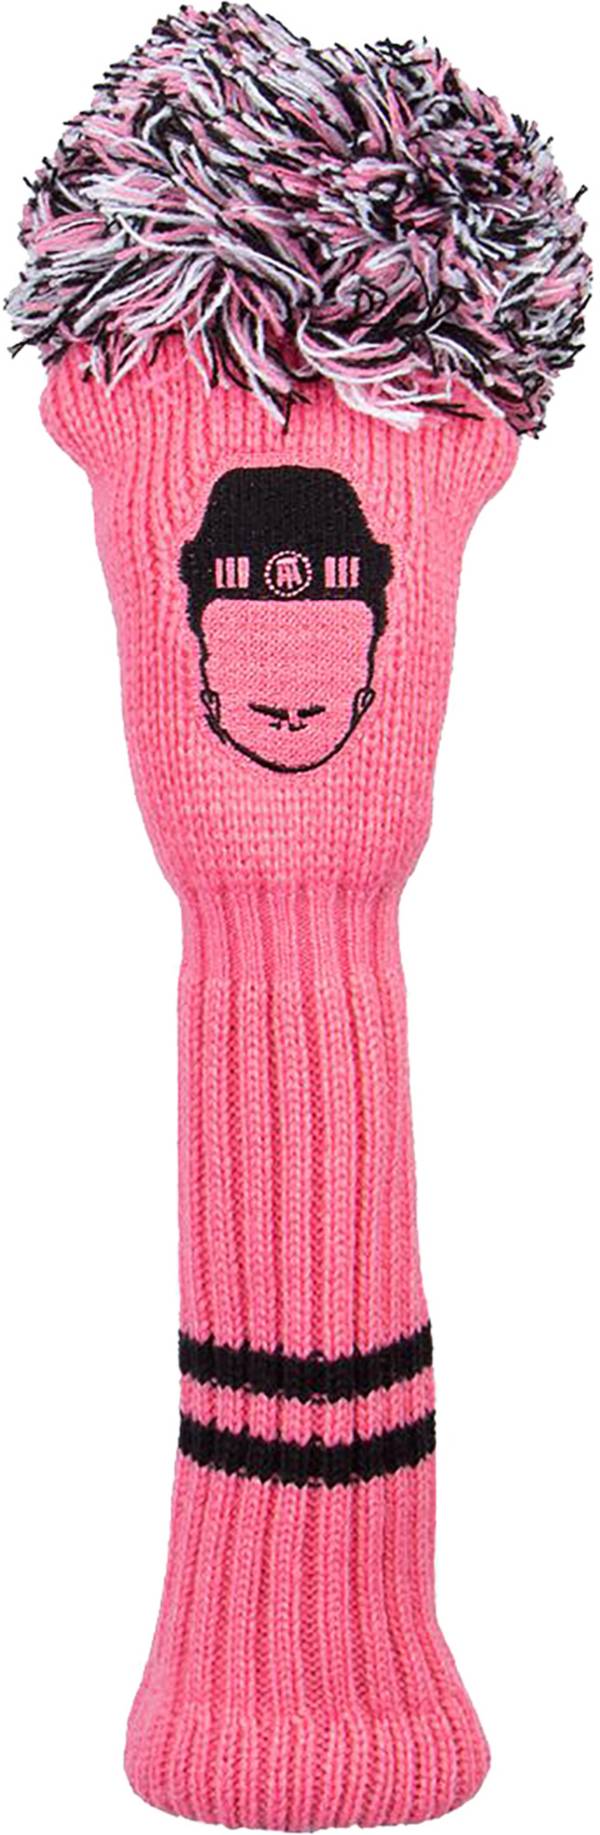 Barstool Sports Pink Whitney Knit Fairway Wood Headcover product image